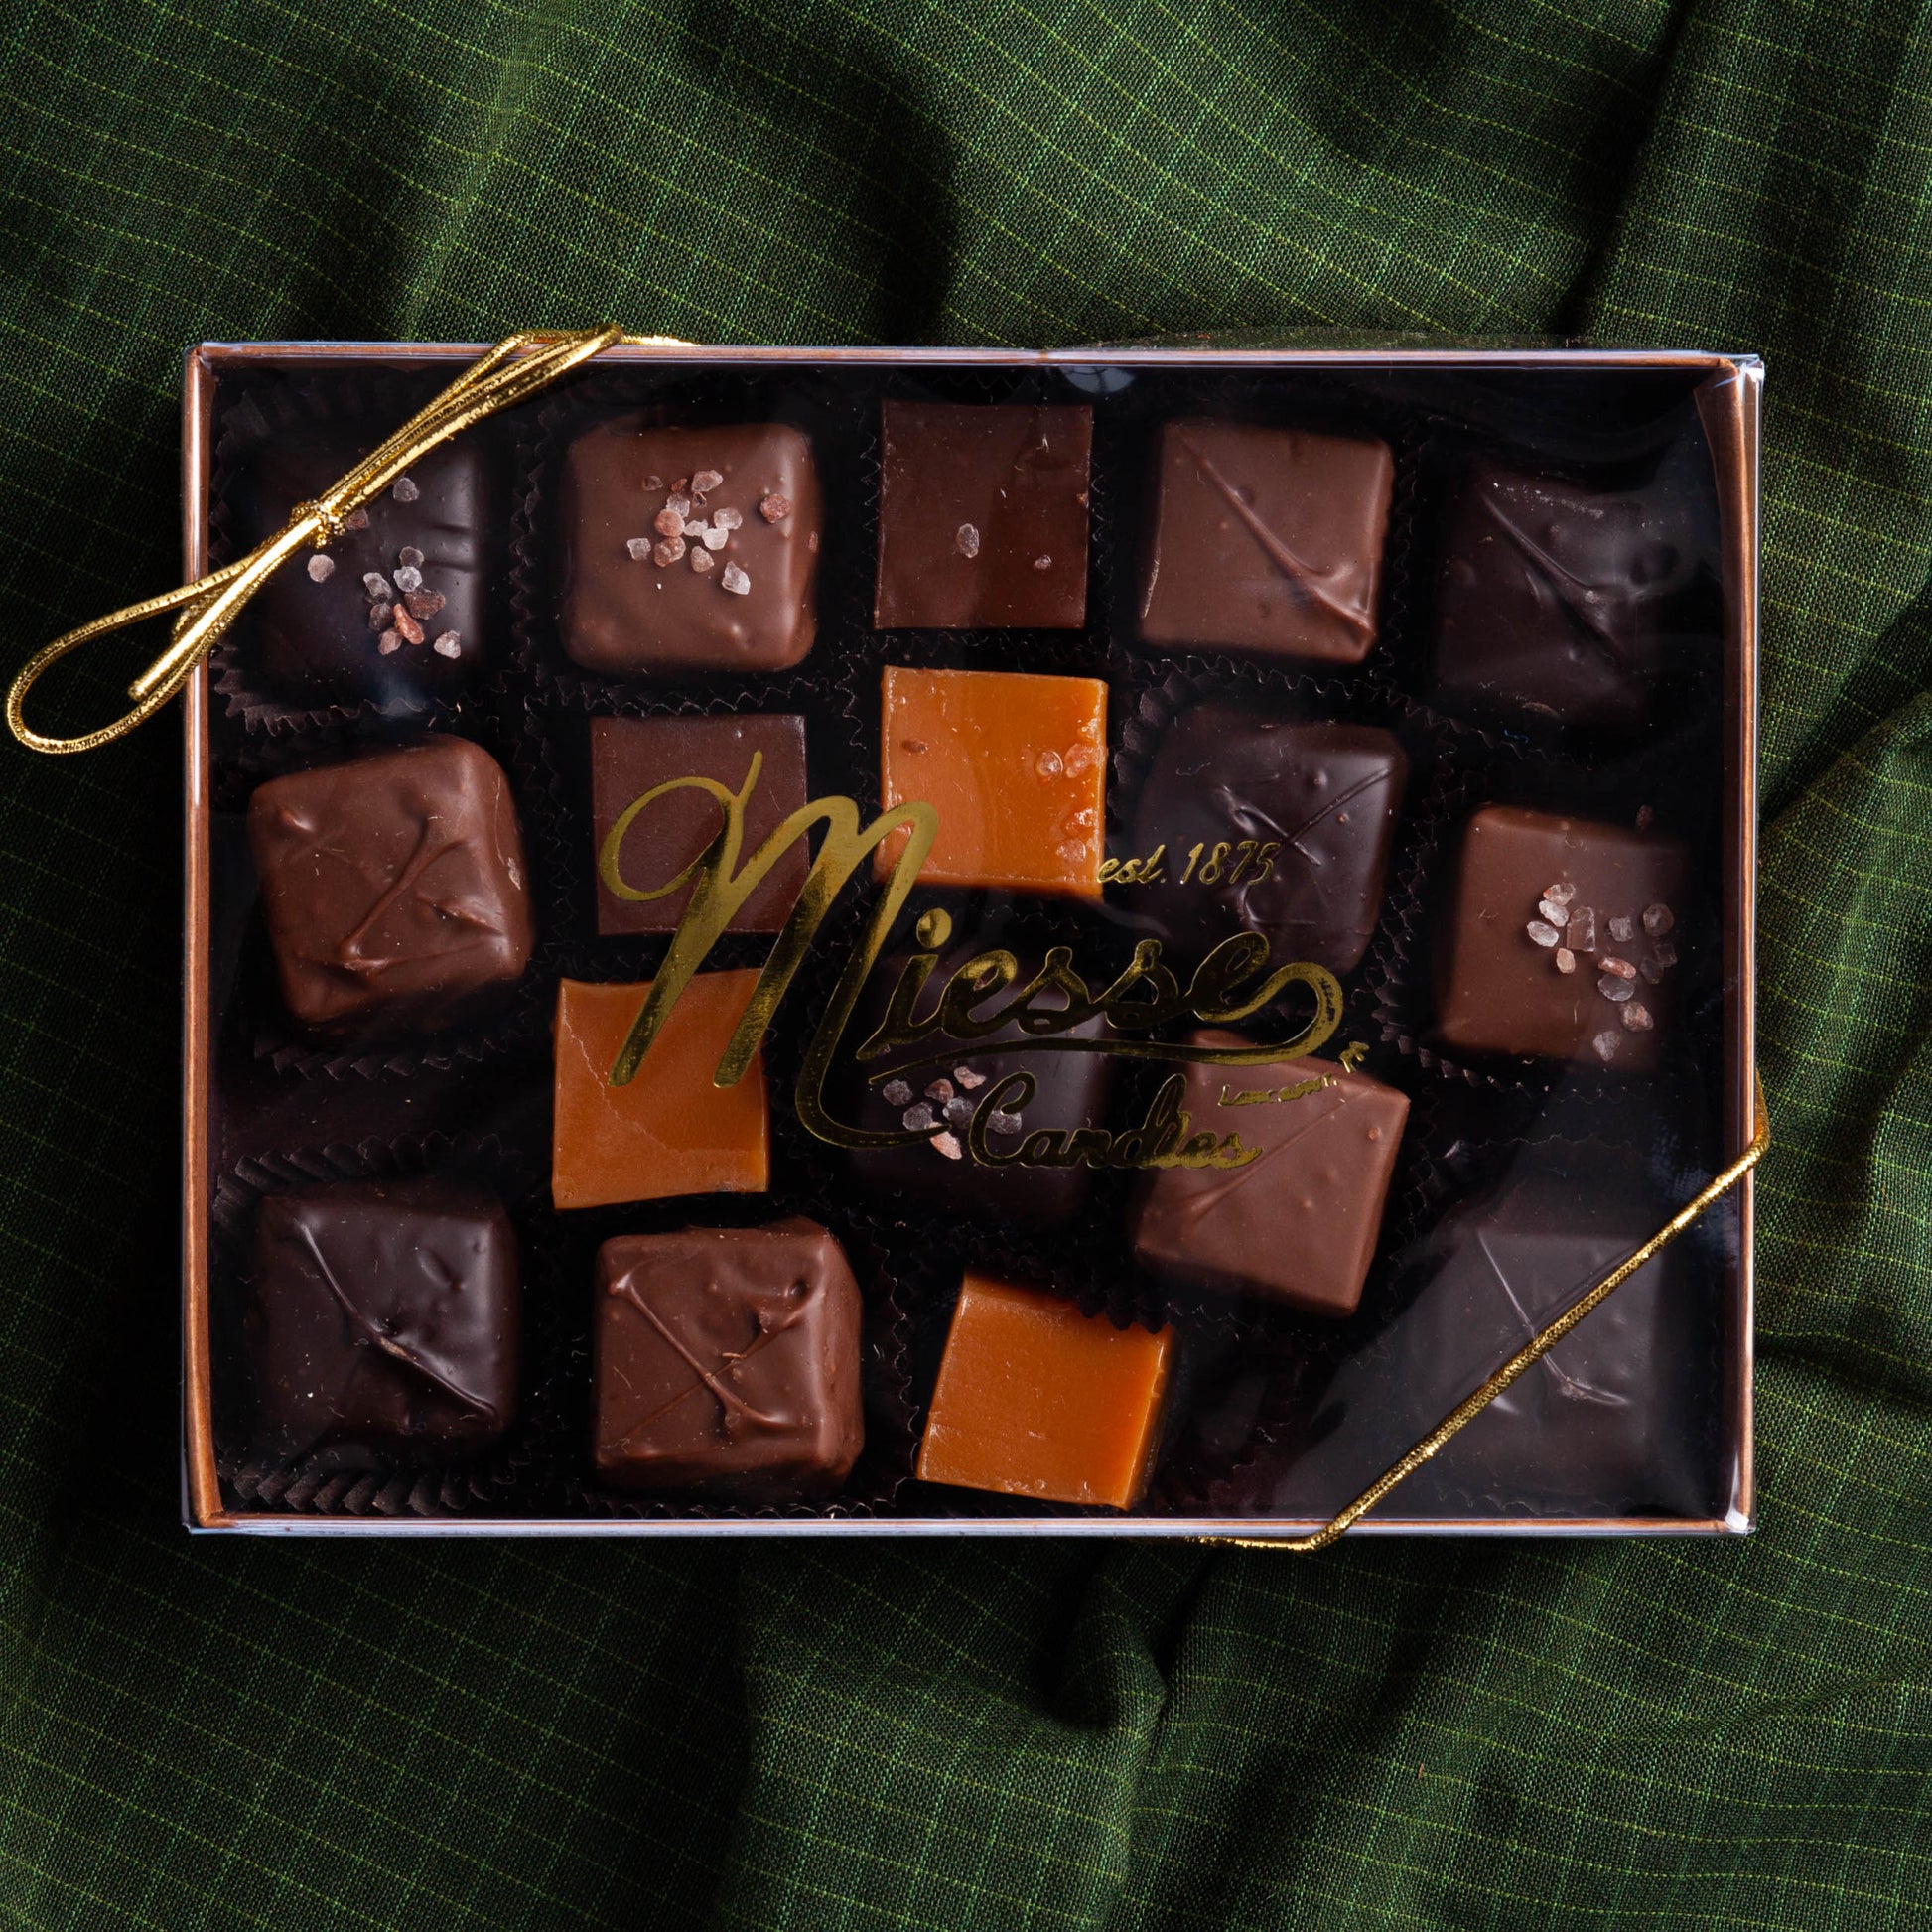 Assorted Chocolate Caramels Box from Miesse Candies